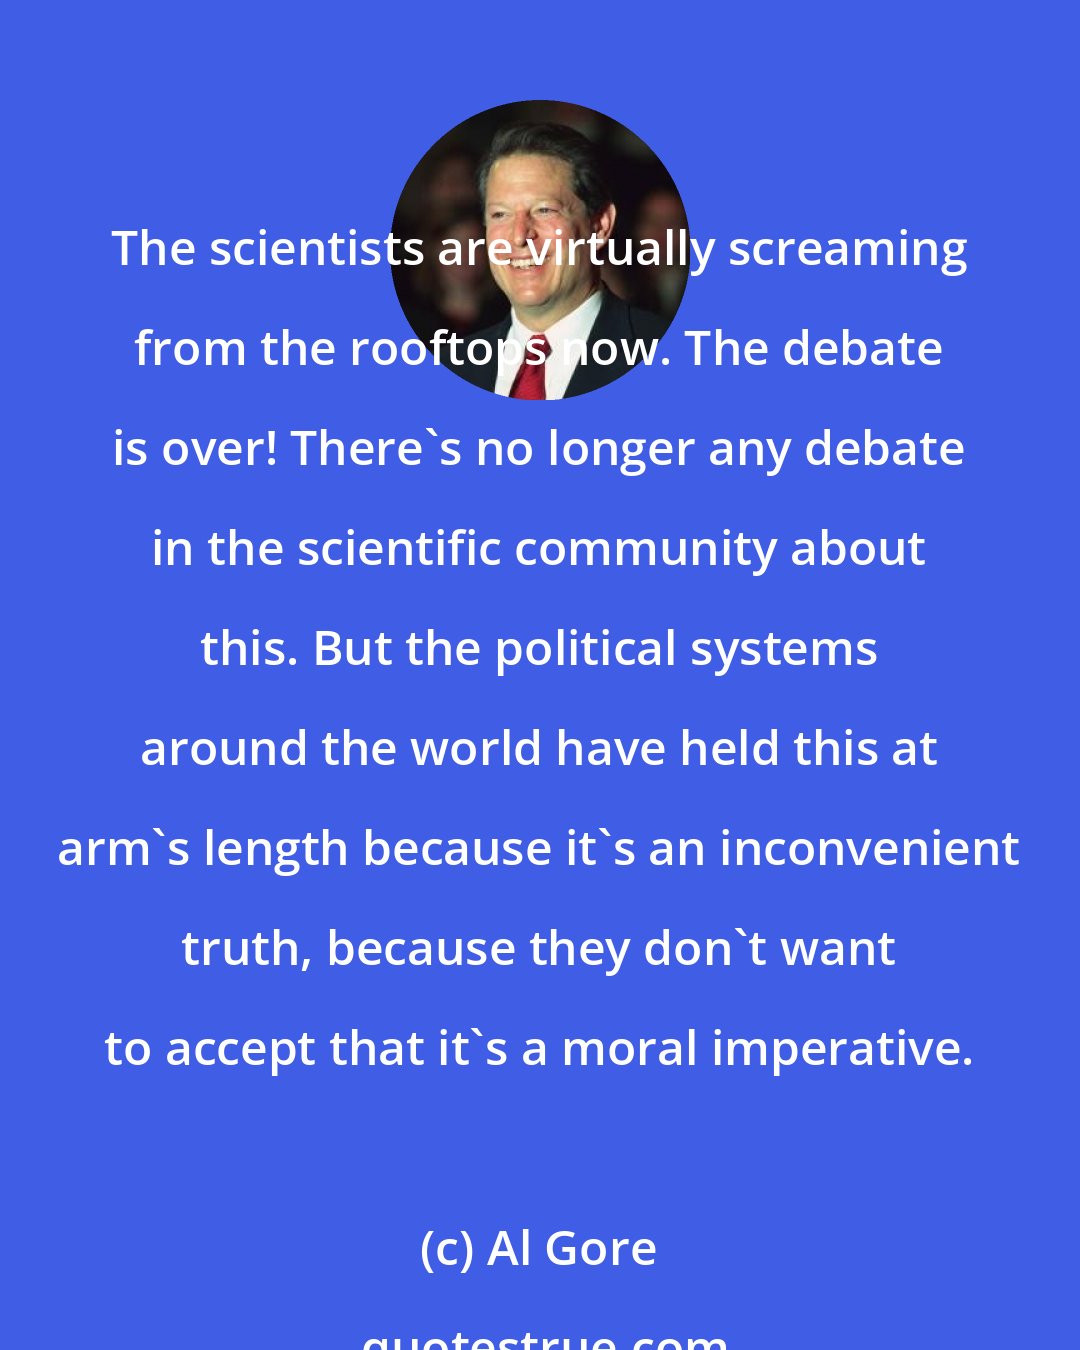 Al Gore: The scientists are virtually screaming from the rooftops now. The debate is over! There's no longer any debate in the scientific community about this. But the political systems around the world have held this at arm's length because it's an inconvenient truth, because they don't want to accept that it's a moral imperative.